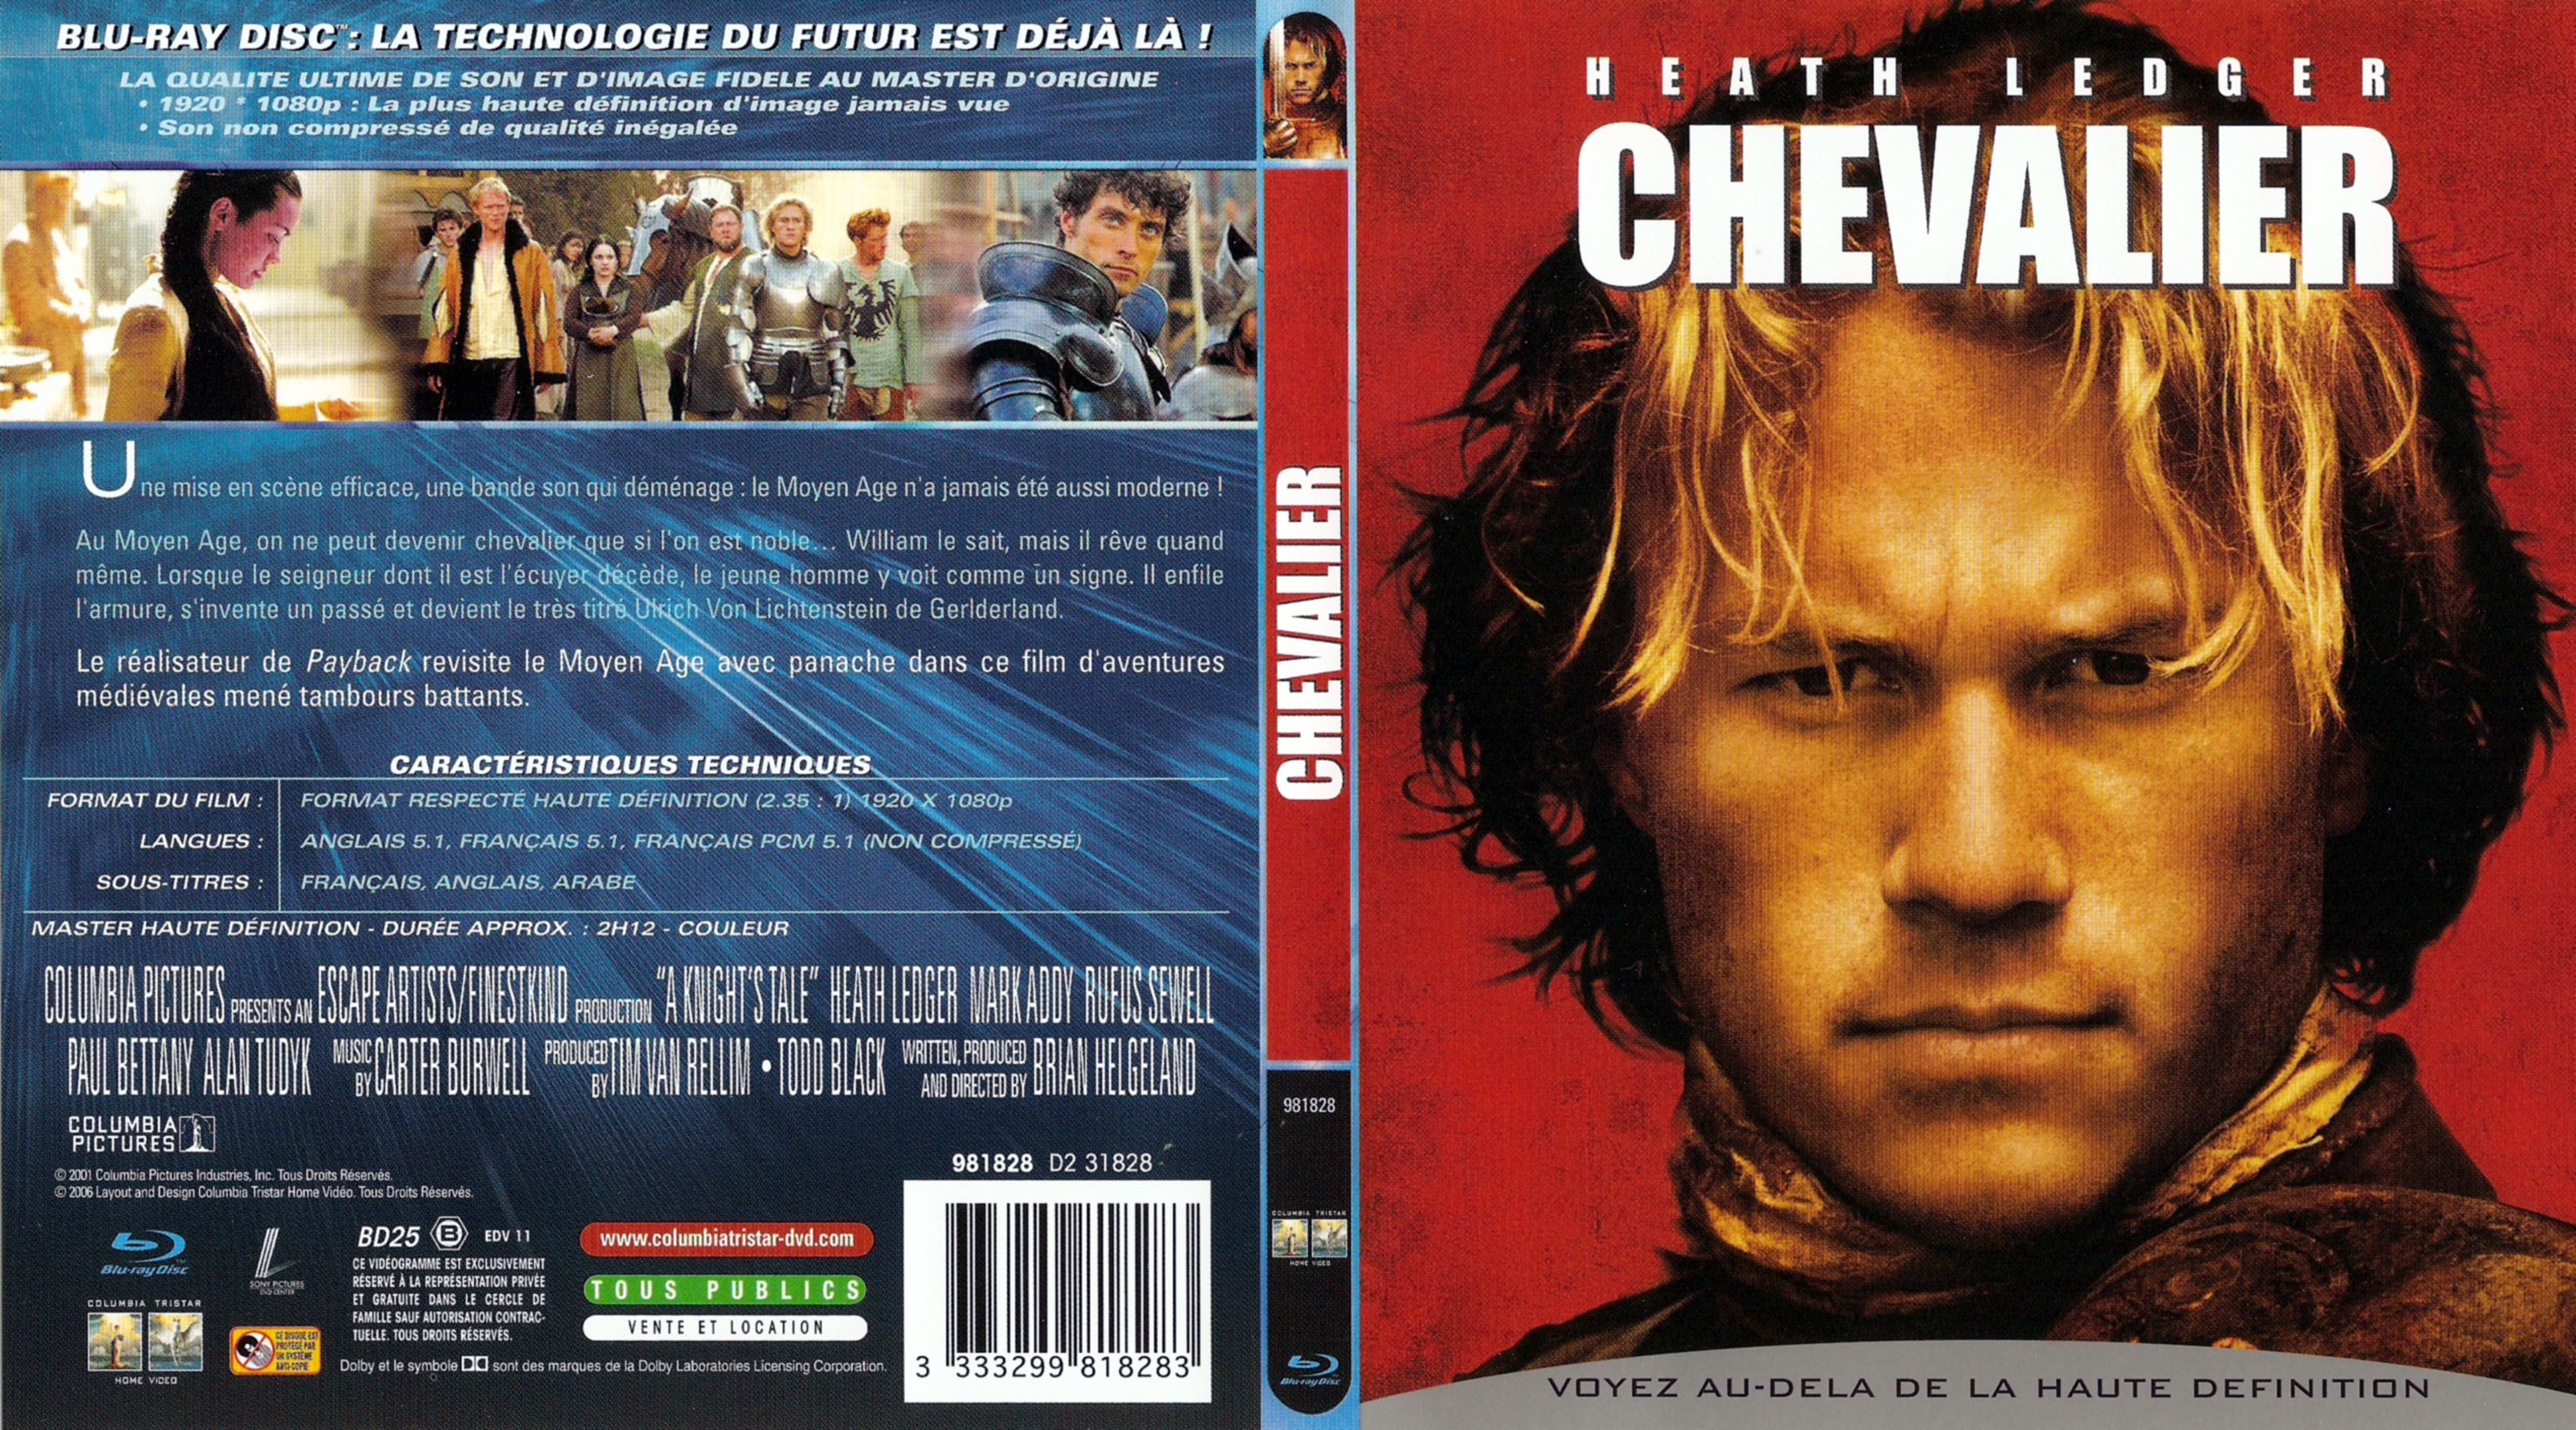 Jaquette DVD Chevalier (BLU-RAY)